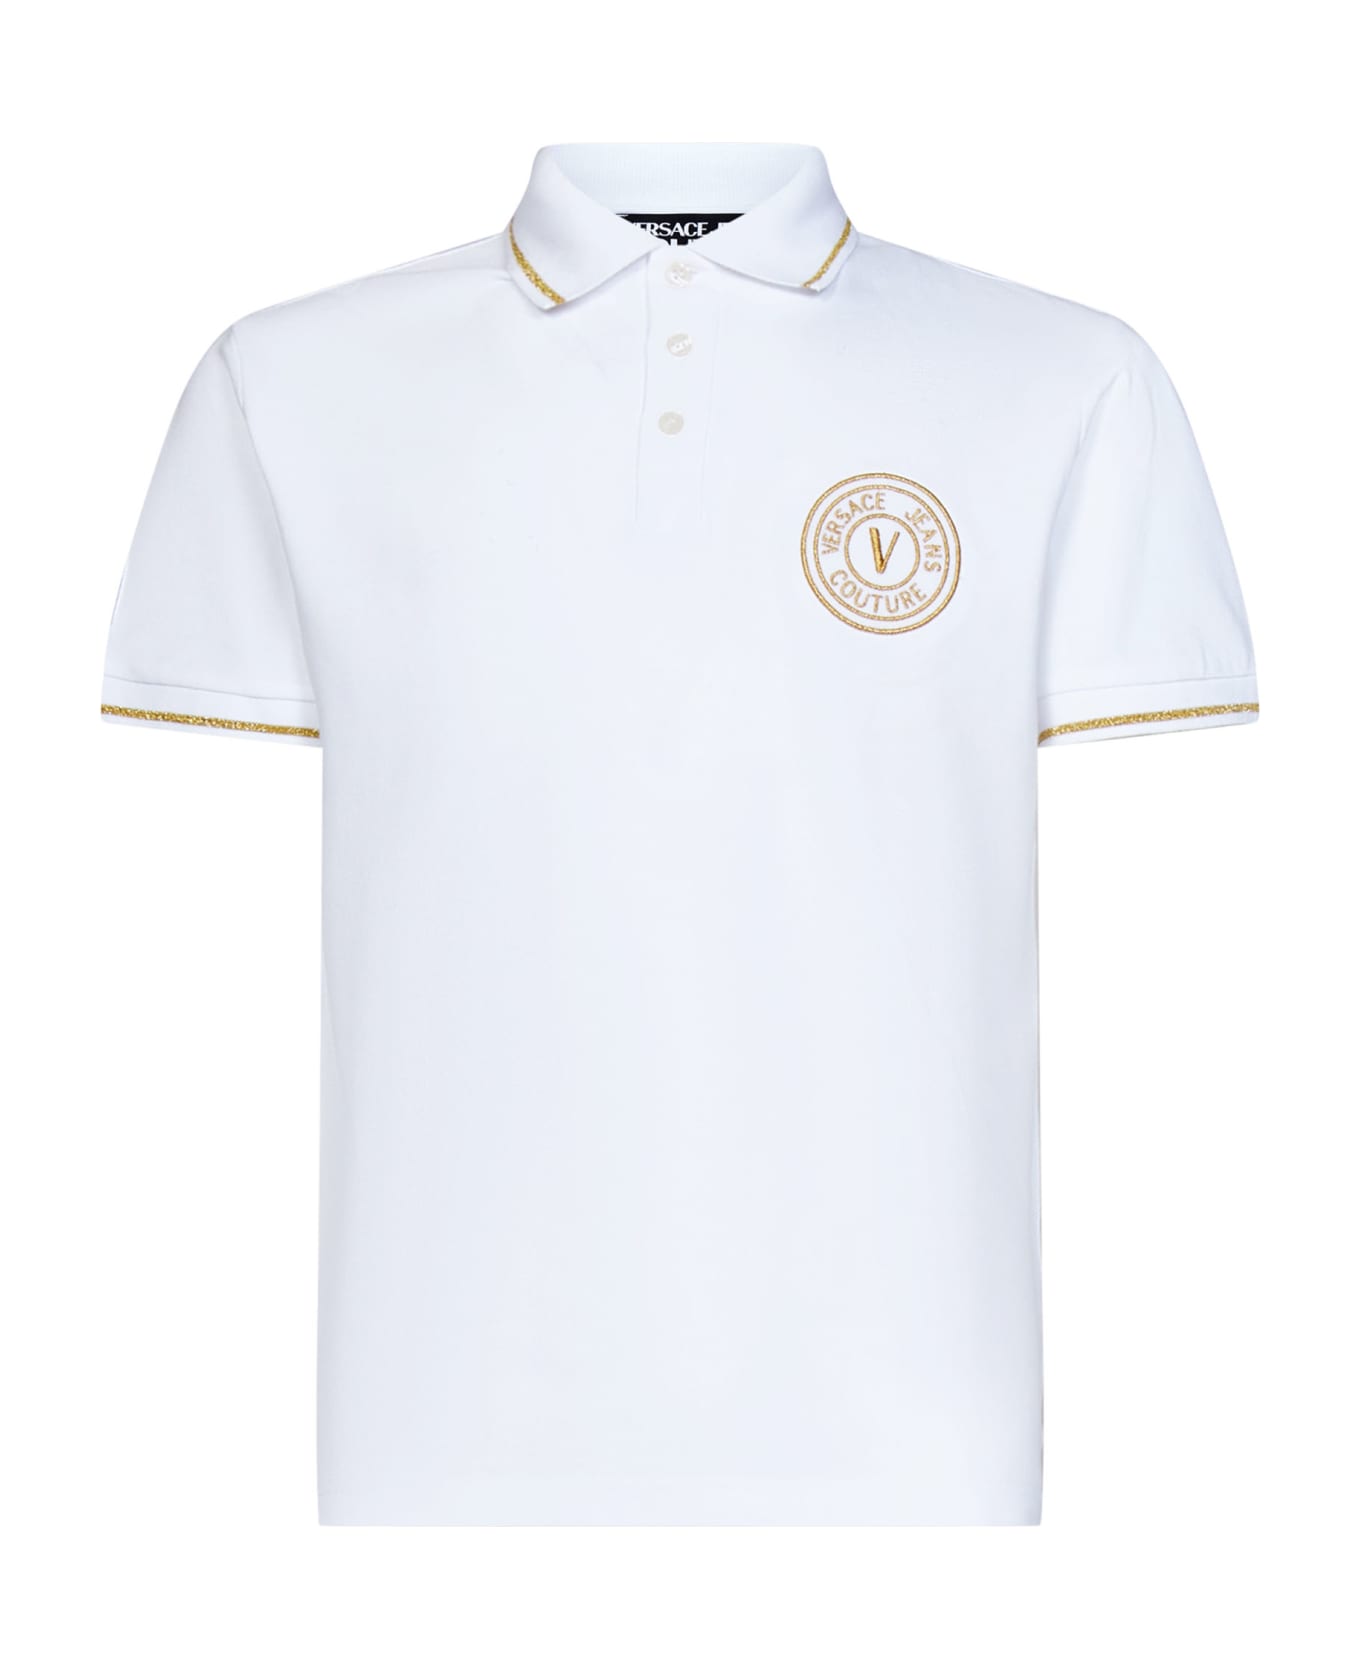 Versace Jeans Couture V-emblem Polo Shirt - White ポロシャツ